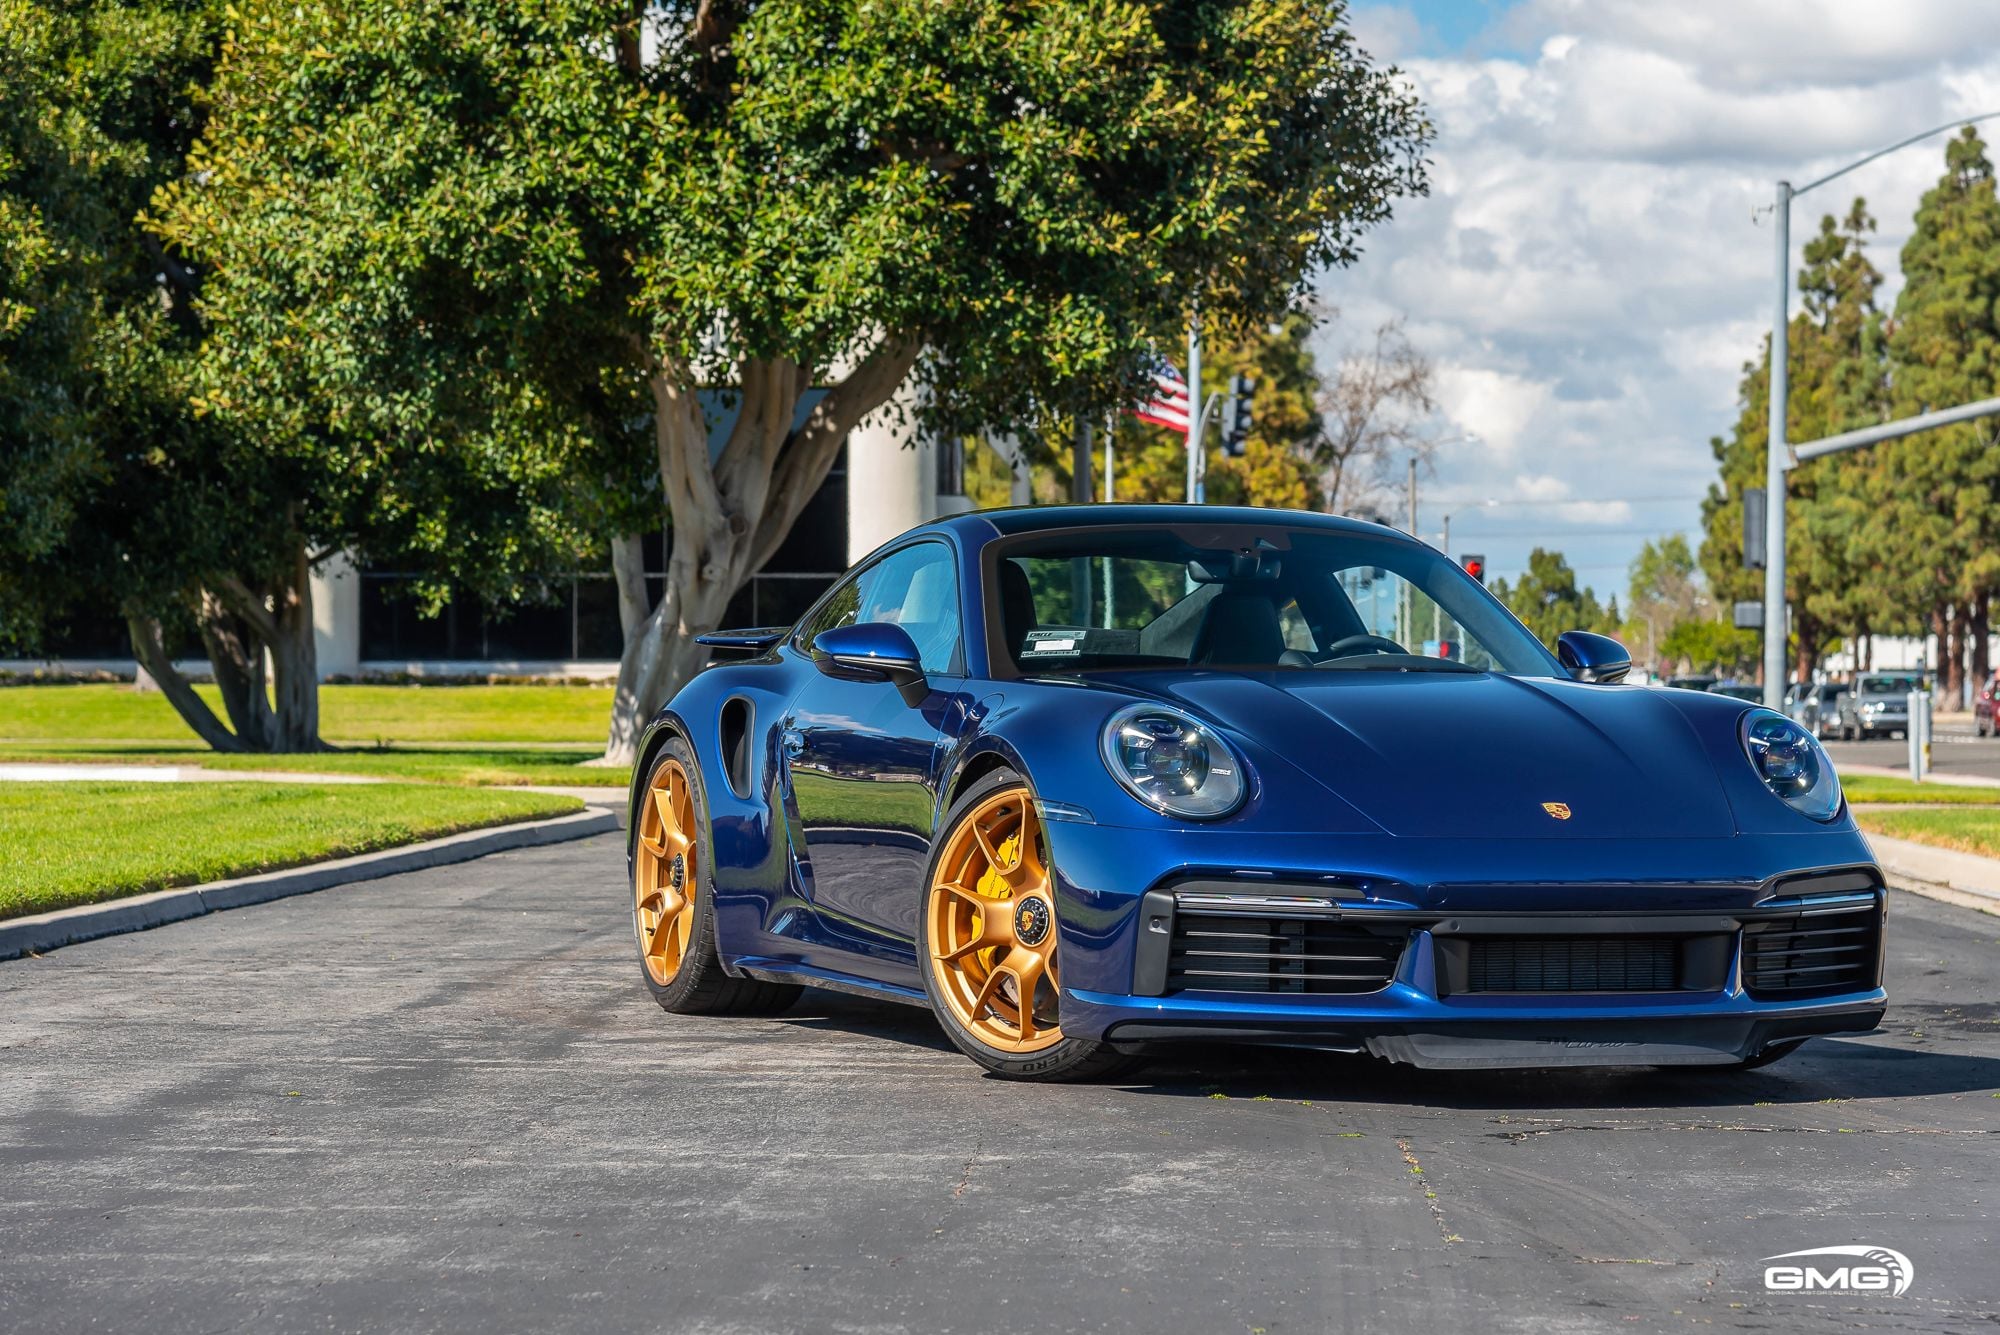 2021 Porsche 911 - GMG Racing - Gentian Blue 2021 Porsche 992 Turbo S - Upgraded & Immaculate! - Used - VIN WP0AD2A9XMS257985 - 1,851 Miles - 6 cyl - AWD - Automatic - Coupe - Blue - Santa Ana, CA 92704, United States